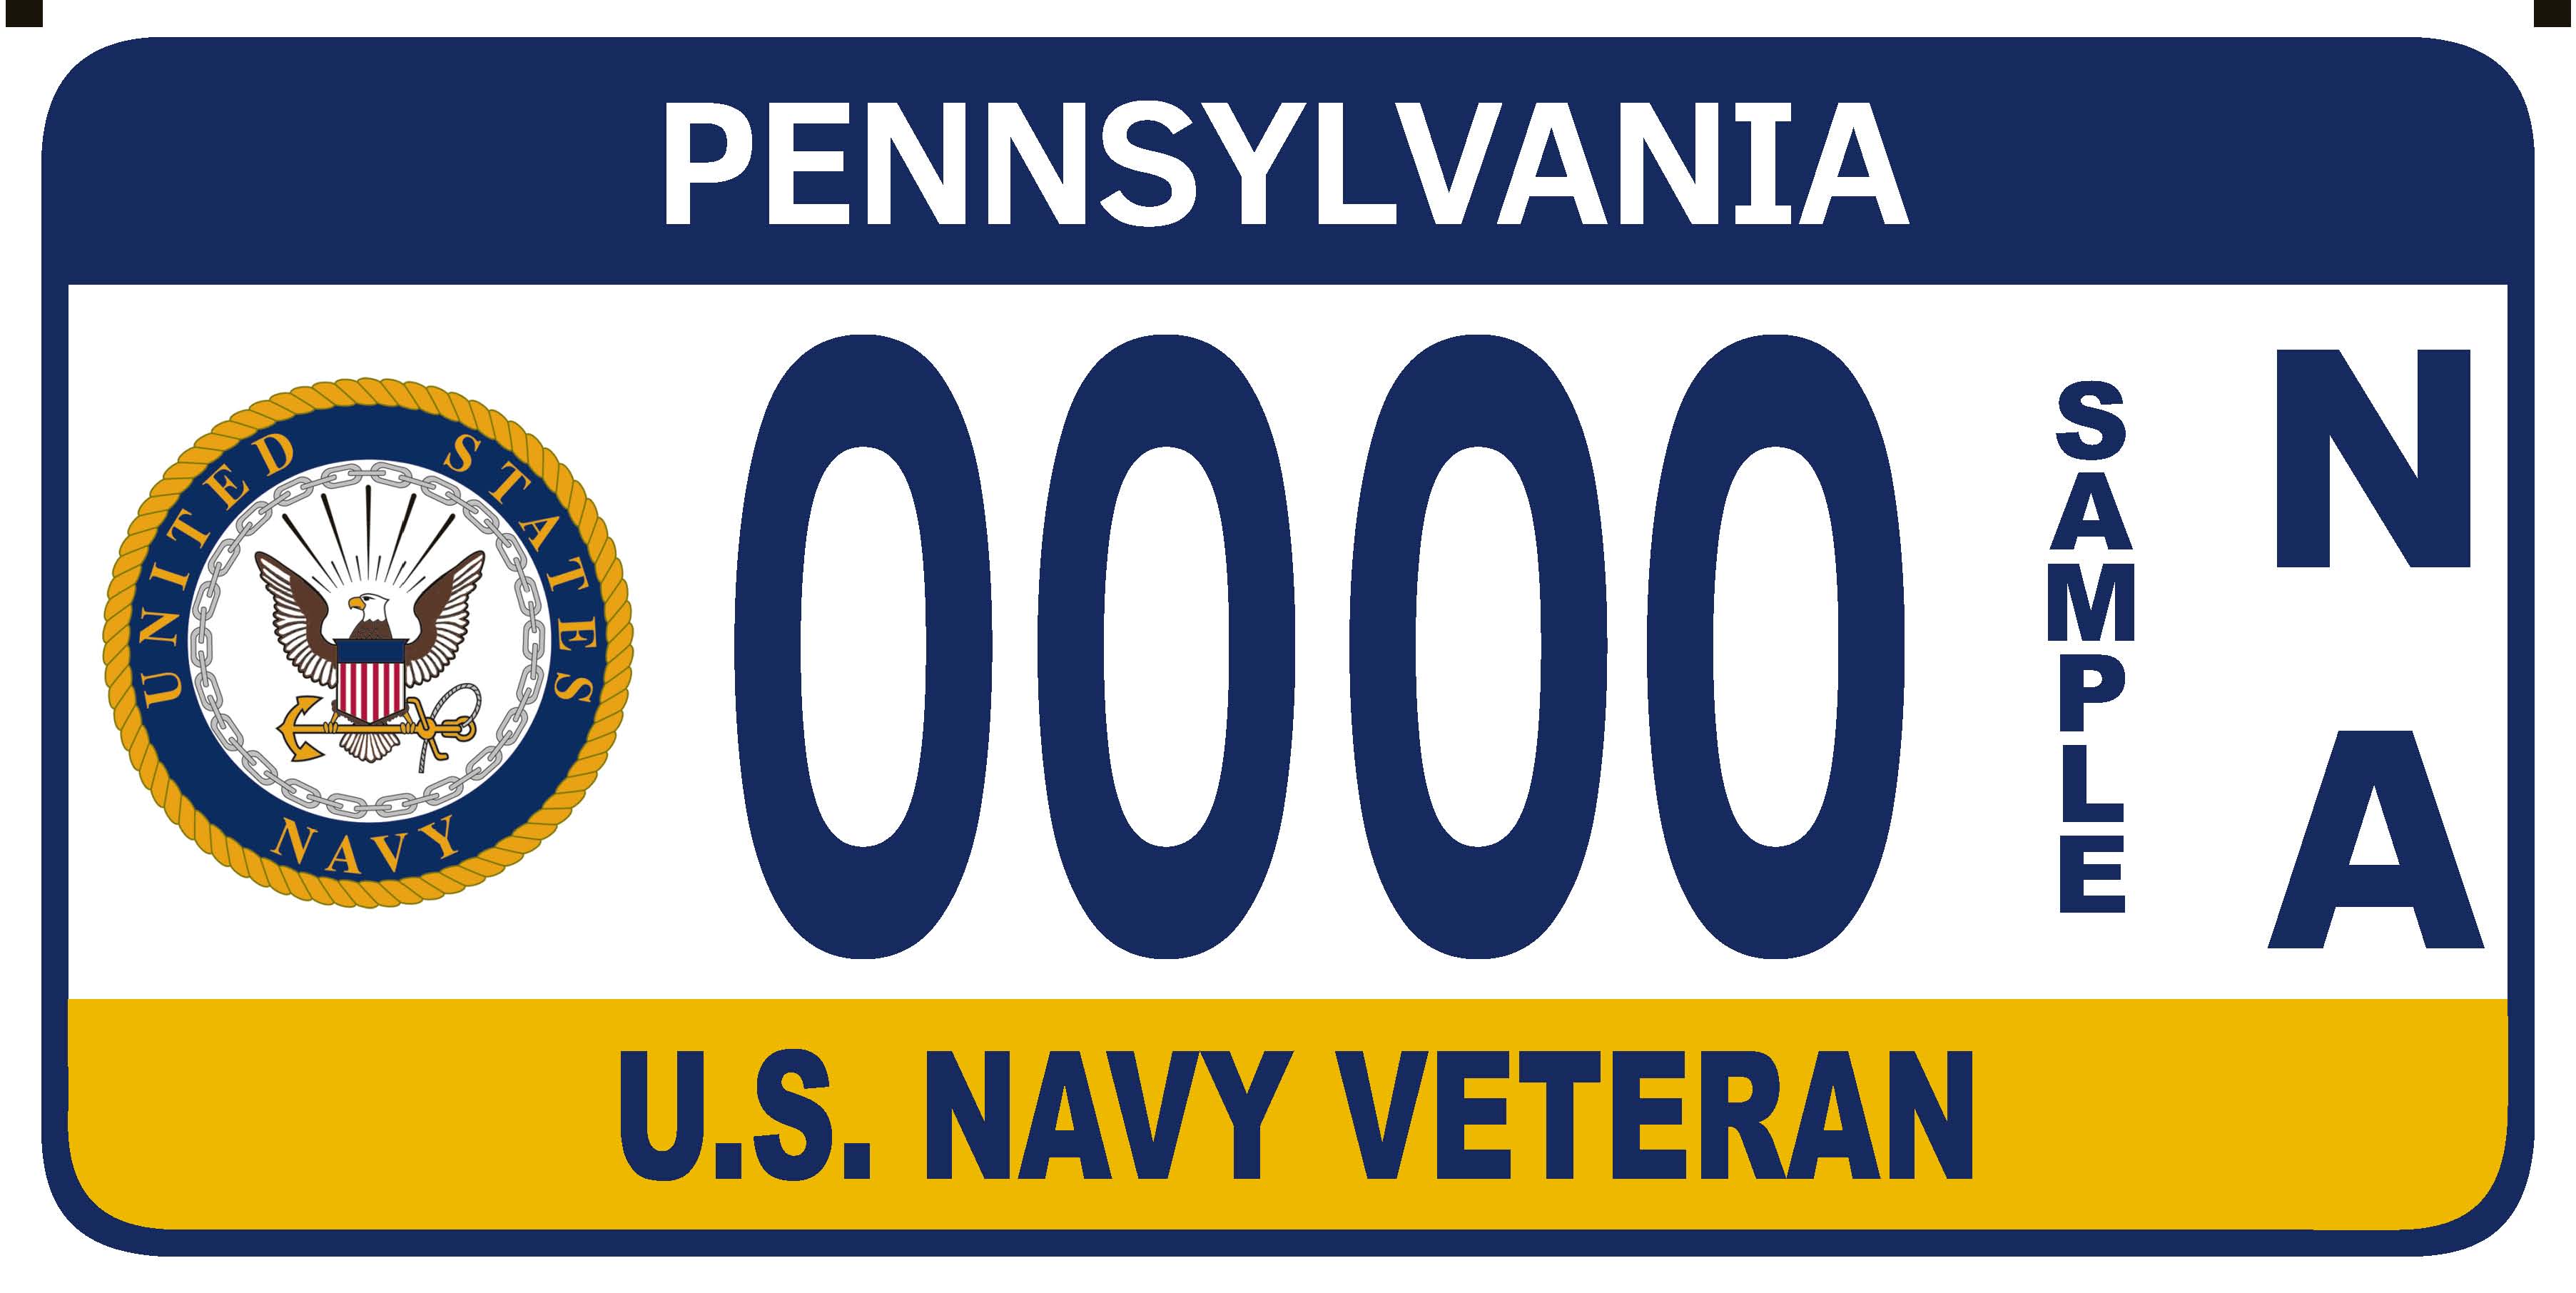 License Plate Support Our Troops Metal Red And Blue On White Plate 